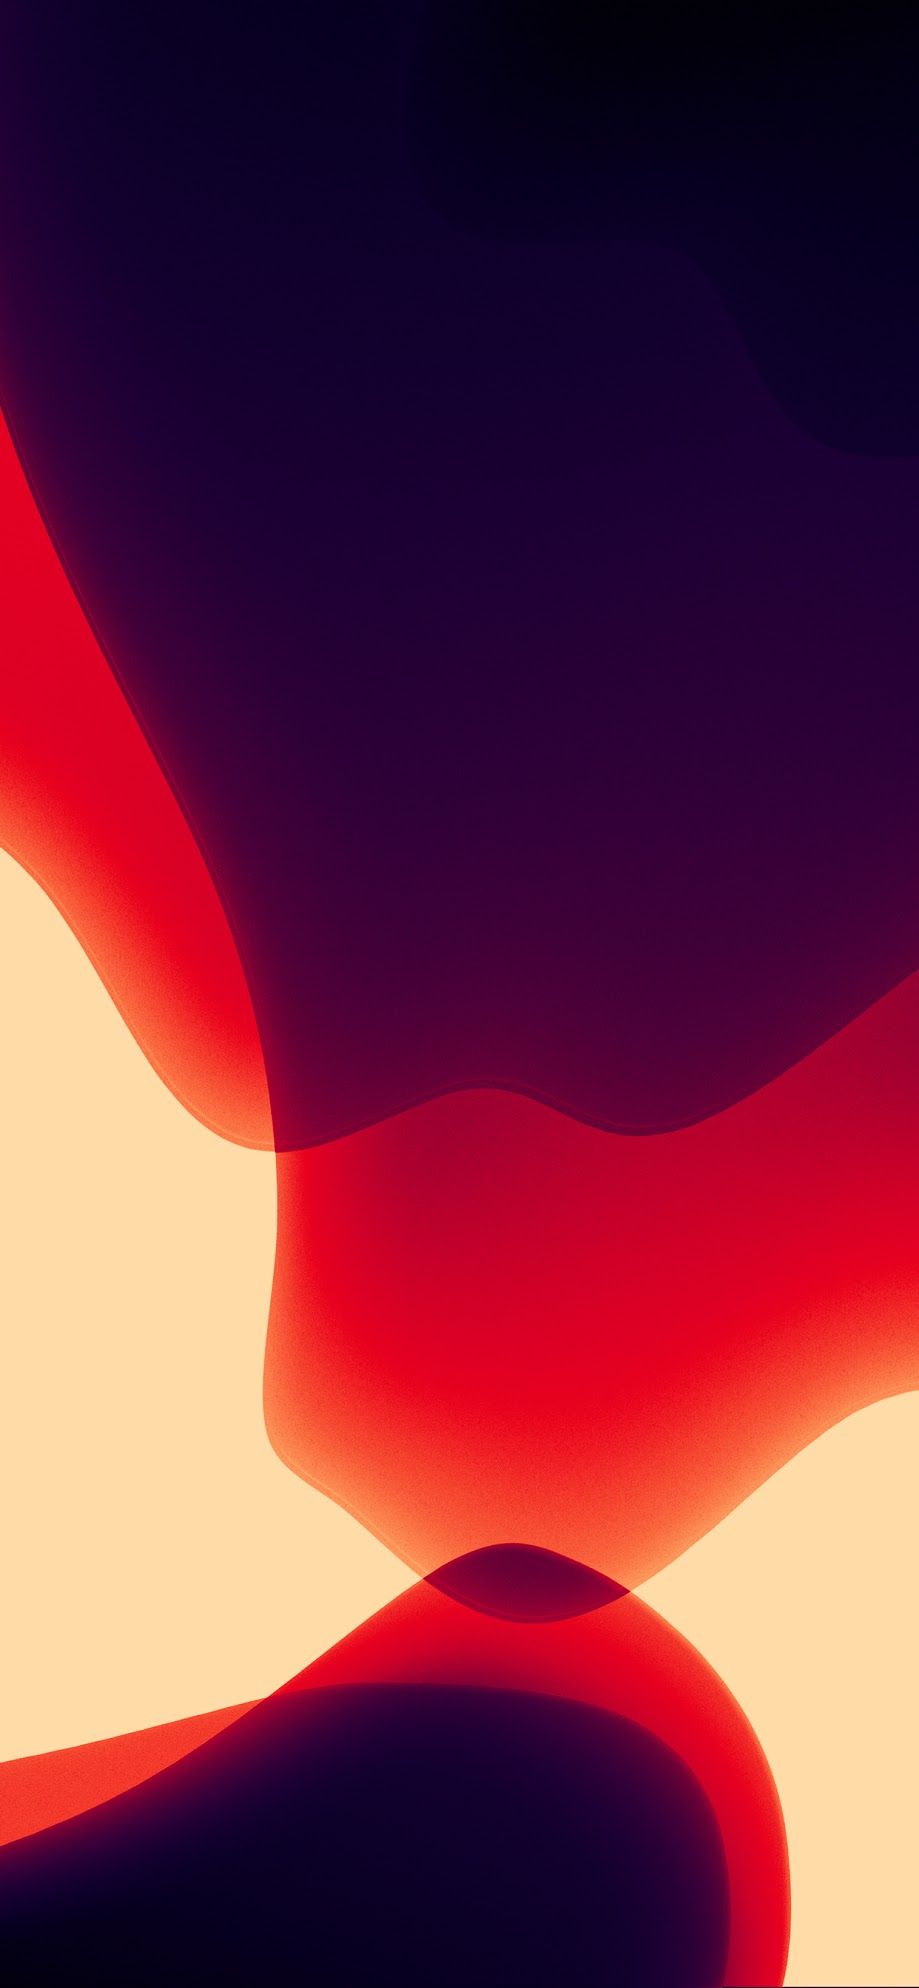 iOS 13 wallpapers in various colors for iPhone and iPad